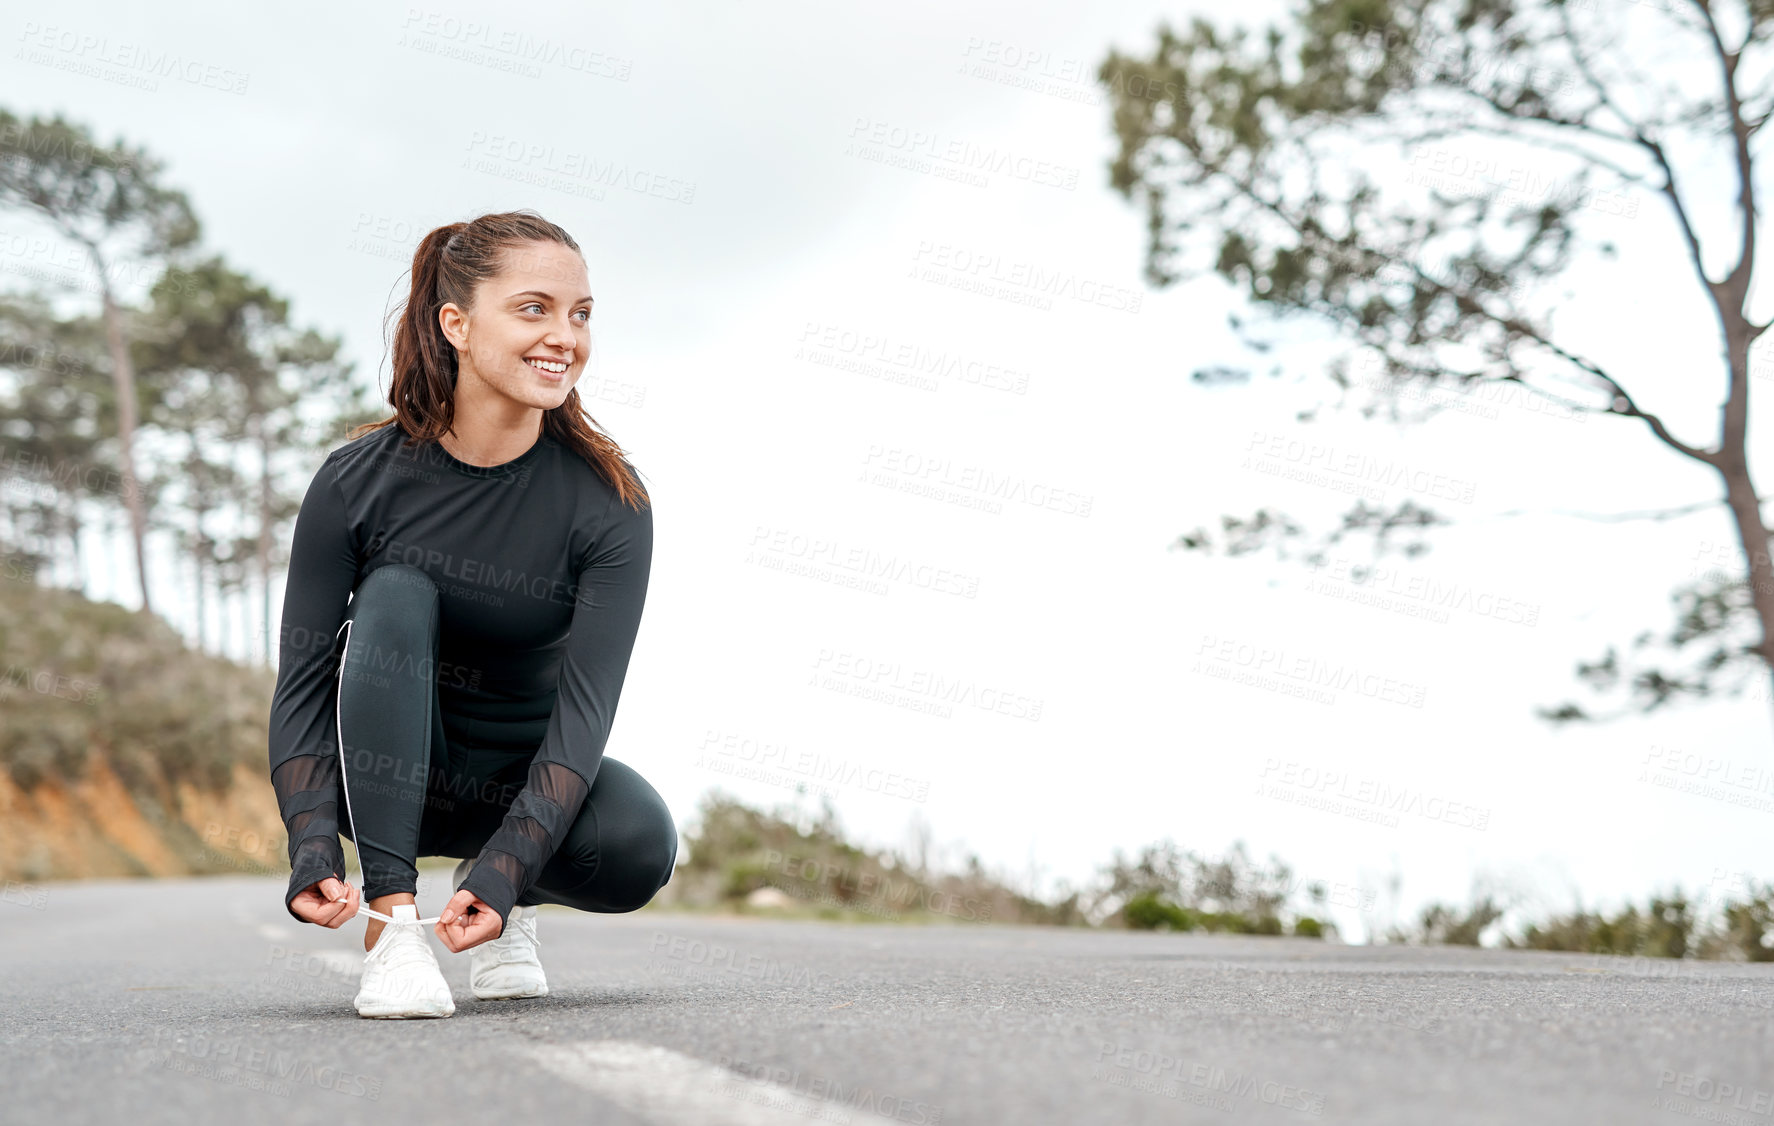 Buy stock photo Full length shot of an attractive young woman tying her shoelaces before exercising outdoors alone